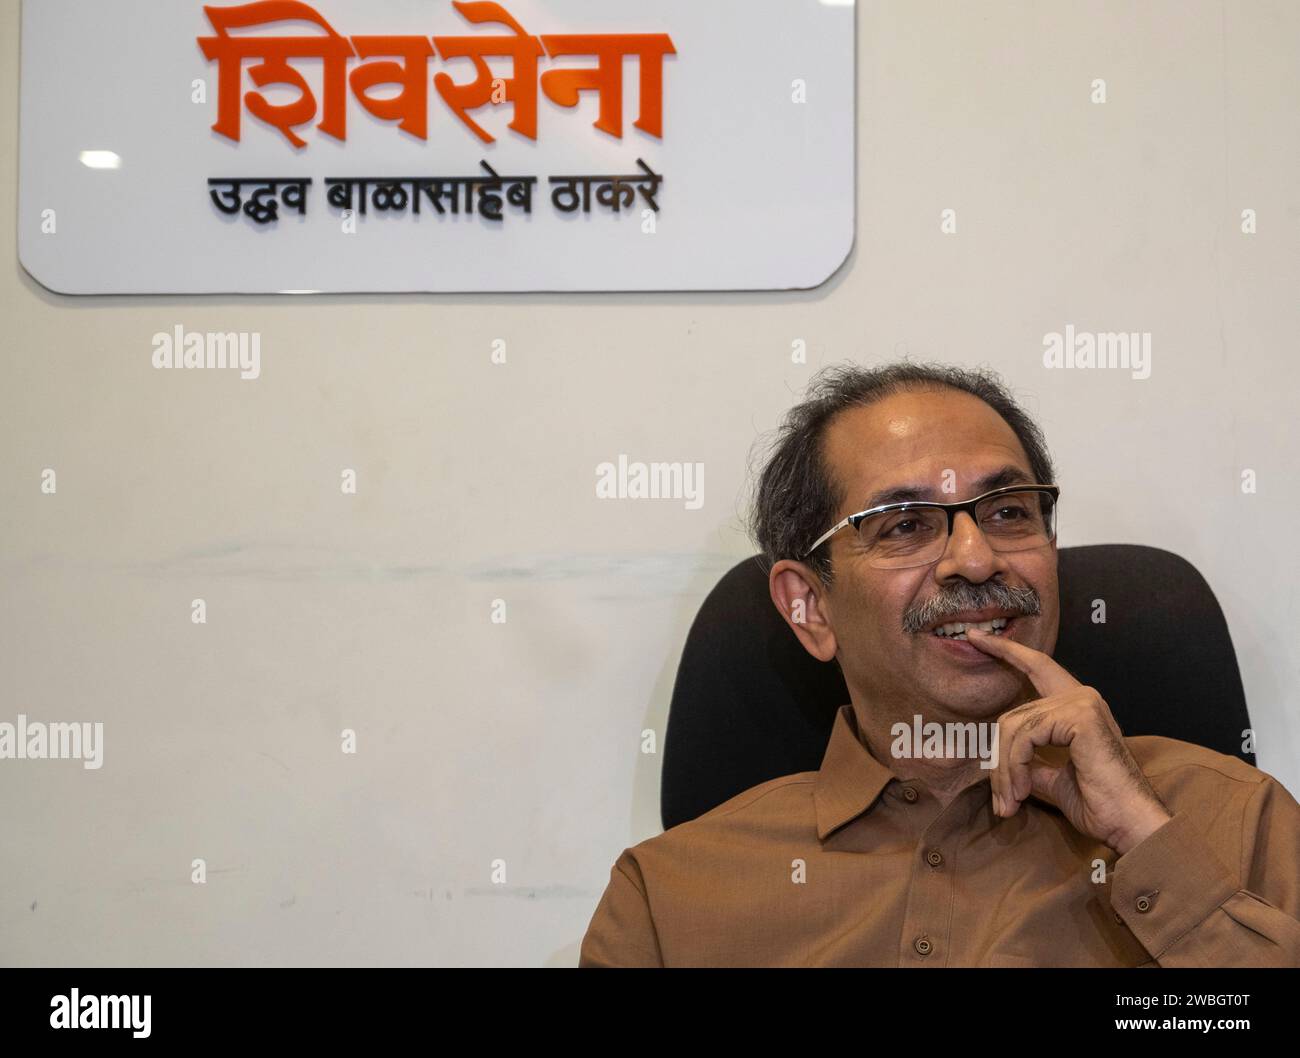 MUMBAI, INDIA - JANUARY 10: Uddhav Thackeray Member of the Maharashtra Legislative Council interact with media after verdict on sena MLAs disqualification at Bandra on January 10, 2024 in Mumbai, India. The Maharashtra Legislative Assembly Speaker Rahul Narwekar today held that Eknath Shinde led faction was the real Shiv Sena when the rival faction emerged within the party on June 22, 2022. He has refused to disqualify any member from both the factions, led by Shinde and Uddhav Thackeray. Both the factions had filed 34 petitions against each other before the speaker in 2022, seeking the disq Stock Photo